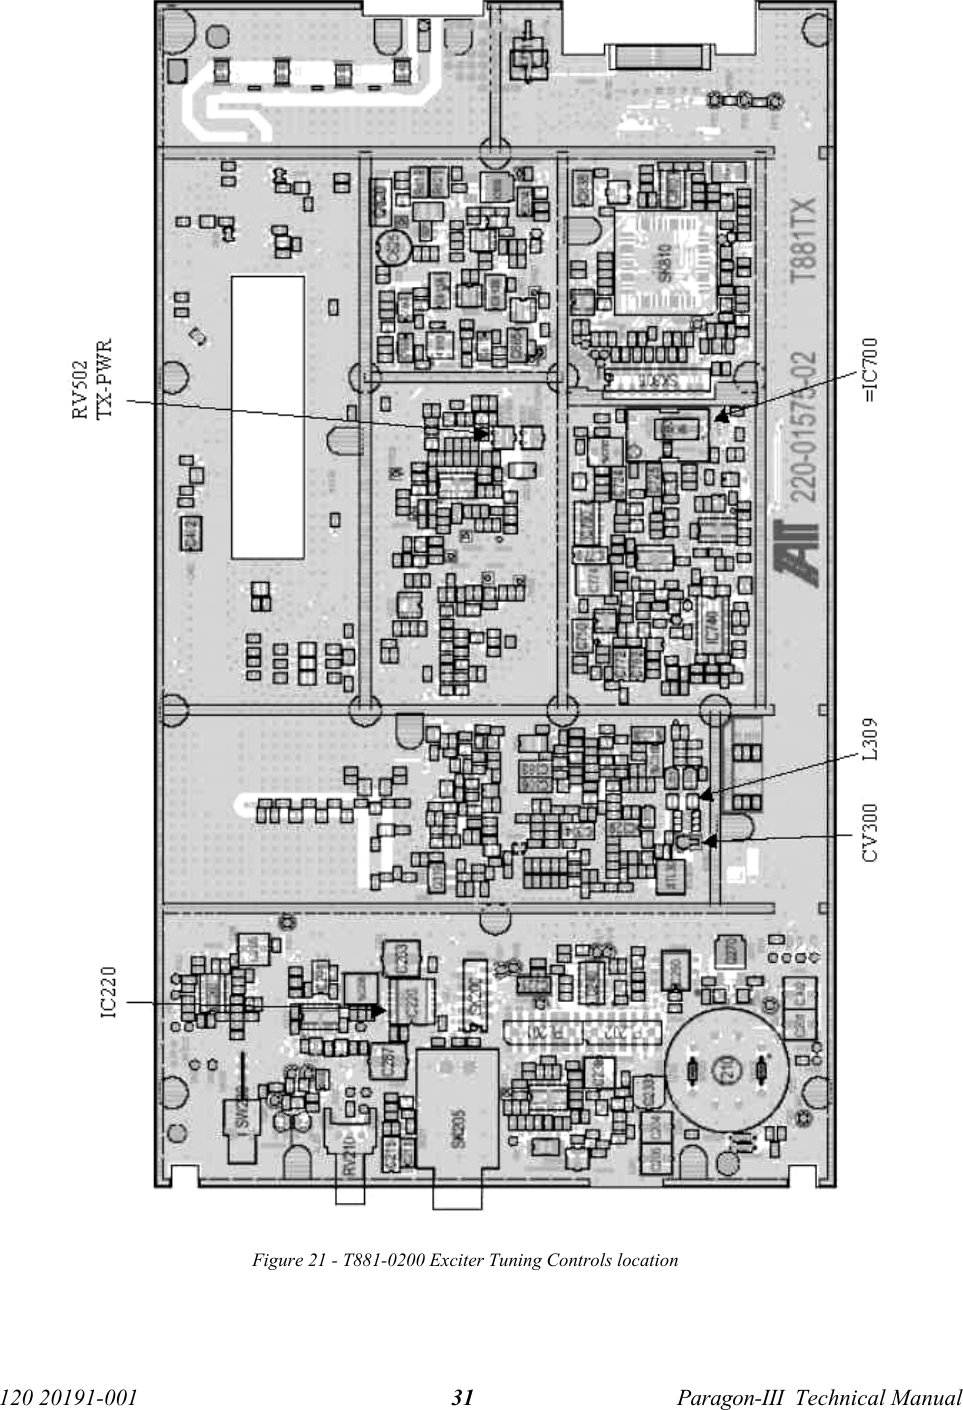   120 20191-001  Paragon-III  Technical Manual 31  Figure 21 - T881-0200 Exciter Tuning Controls location